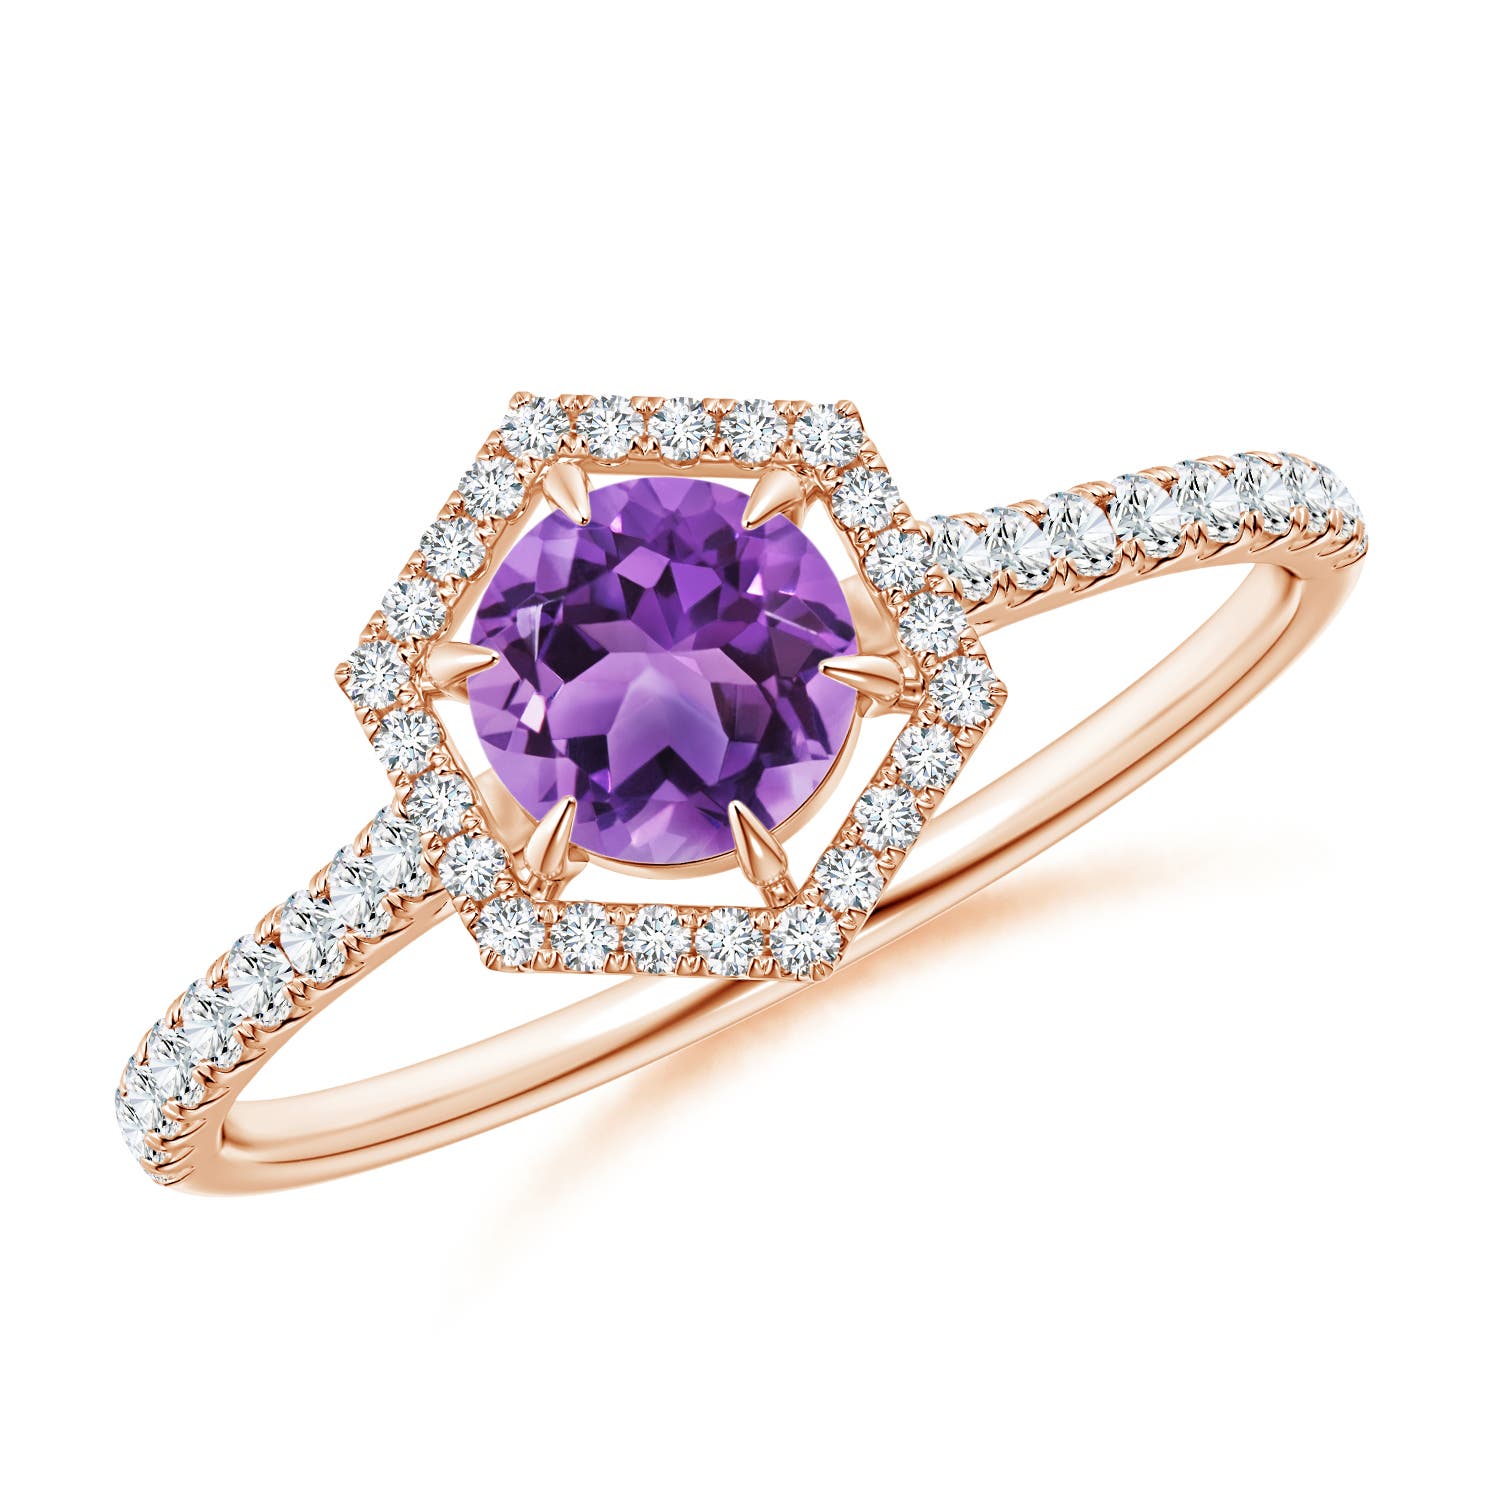 AA - Amethyst / 0.71 CT / 14 KT Rose Gold